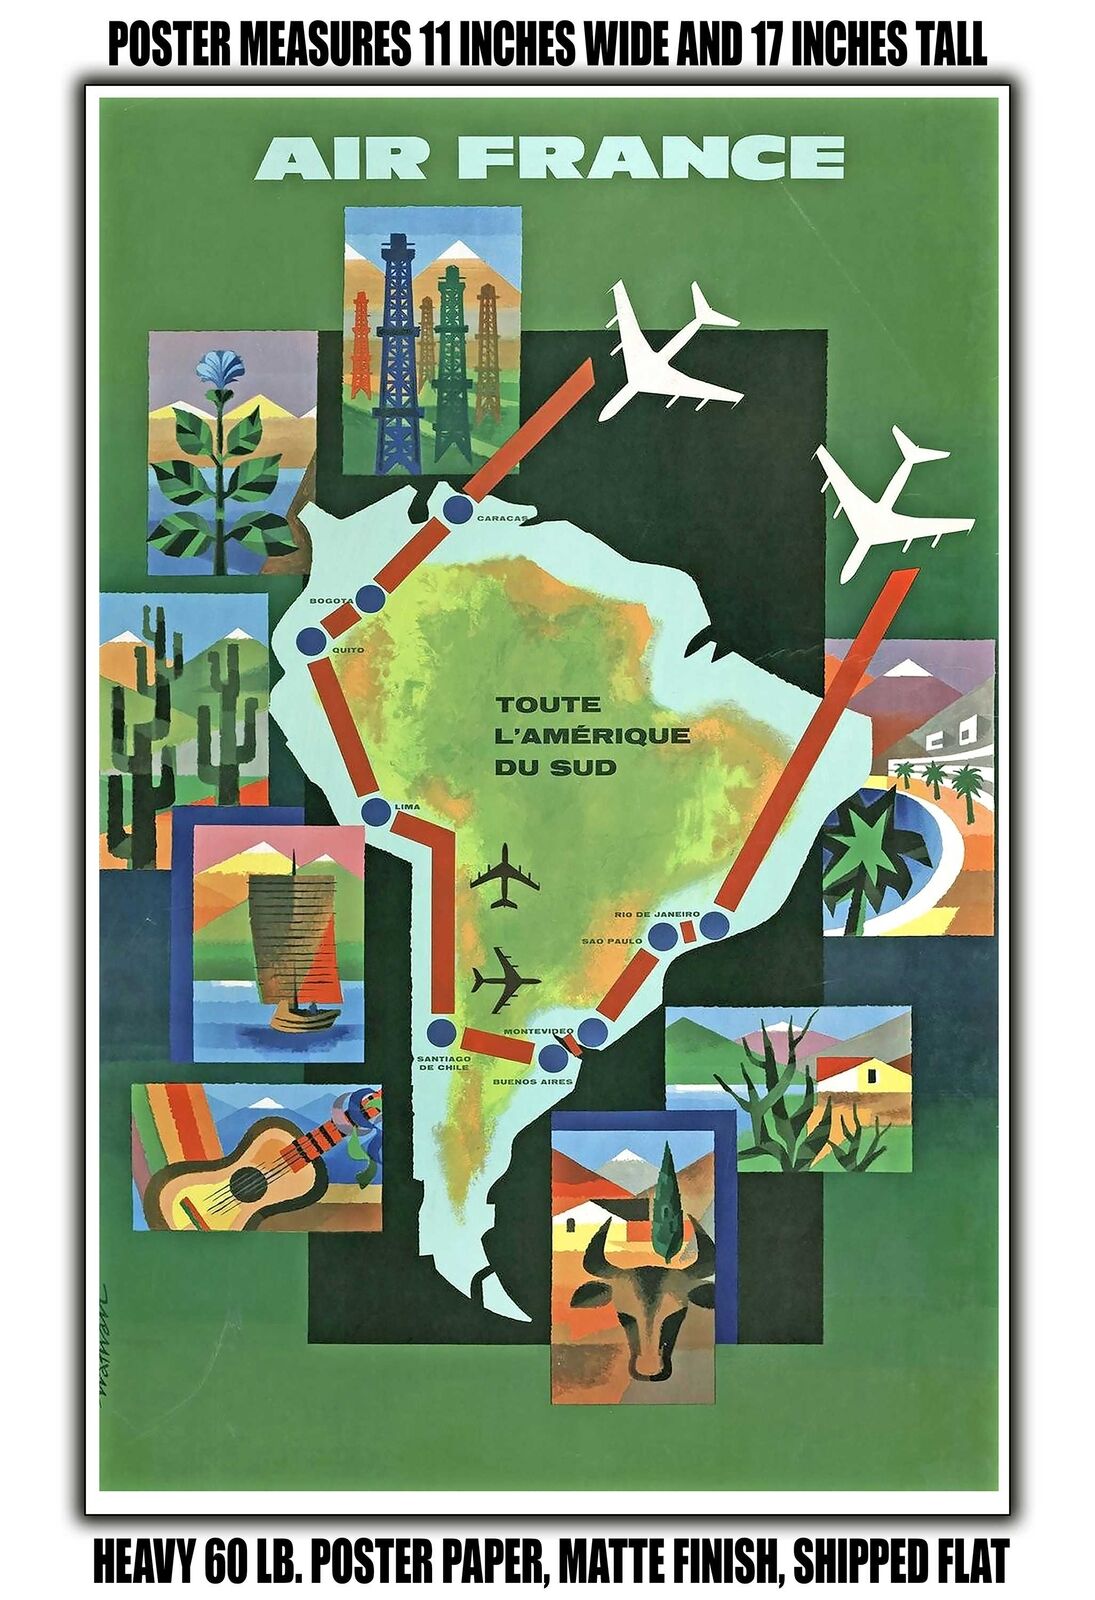 11x17 POSTER - 1963 Air France, All of South America